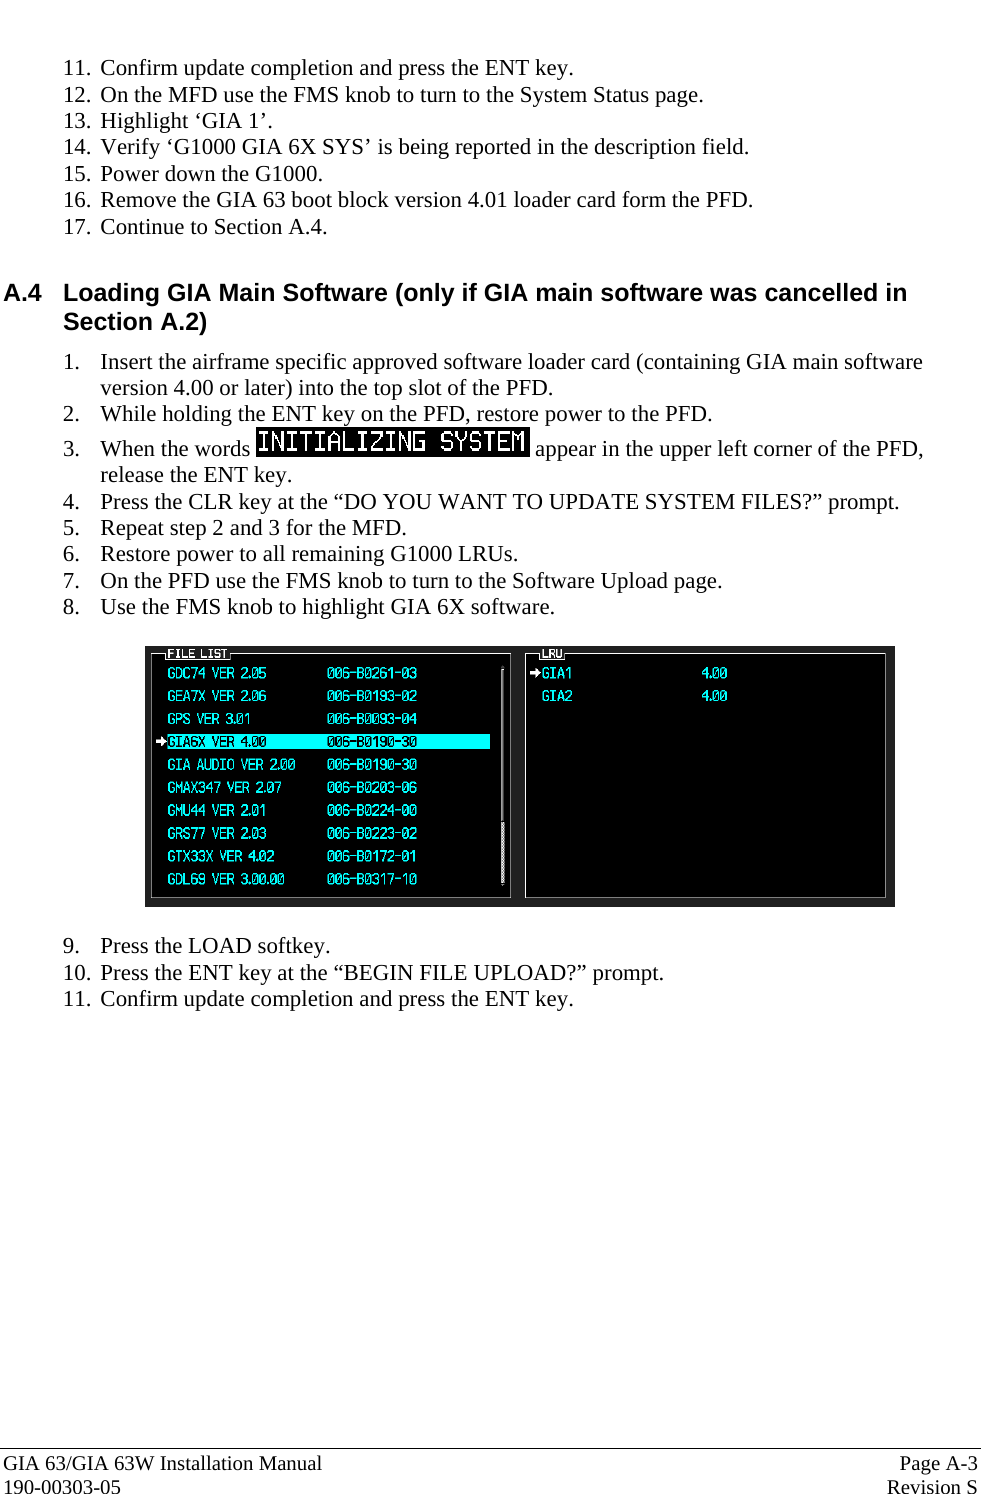  GIA 63/GIA 63W Installation Manual  Page A-3 190-00303-05  Revision S  11. Confirm update completion and press the ENT key. 12. On the MFD use the FMS knob to turn to the System Status page. 13. Highlight ‘GIA 1’. 14. Verify ‘G1000 GIA 6X SYS’ is being reported in the description field. 15. Power down the G1000. 16. Remove the GIA 63 boot block version 4.01 loader card form the PFD. 17. Continue to Section A.4.  A.4  Loading GIA Main Software (only if GIA main software was cancelled in Section A.2) 1. Insert the airframe specific approved software loader card (containing GIA main software version 4.00 or later) into the top slot of the PFD. 2. While holding the ENT key on the PFD, restore power to the PFD. 3. When the words   appear in the upper left corner of the PFD, release the ENT key. 4. Press the CLR key at the “DO YOU WANT TO UPDATE SYSTEM FILES?” prompt. 5. Repeat step 2 and 3 for the MFD. 6. Restore power to all remaining G1000 LRUs. 7. On the PFD use the FMS knob to turn to the Software Upload page. 8. Use the FMS knob to highlight GIA 6X software.    9. Press the LOAD softkey. 10. Press the ENT key at the “BEGIN FILE UPLOAD?” prompt. 11. Confirm update completion and press the ENT key.      